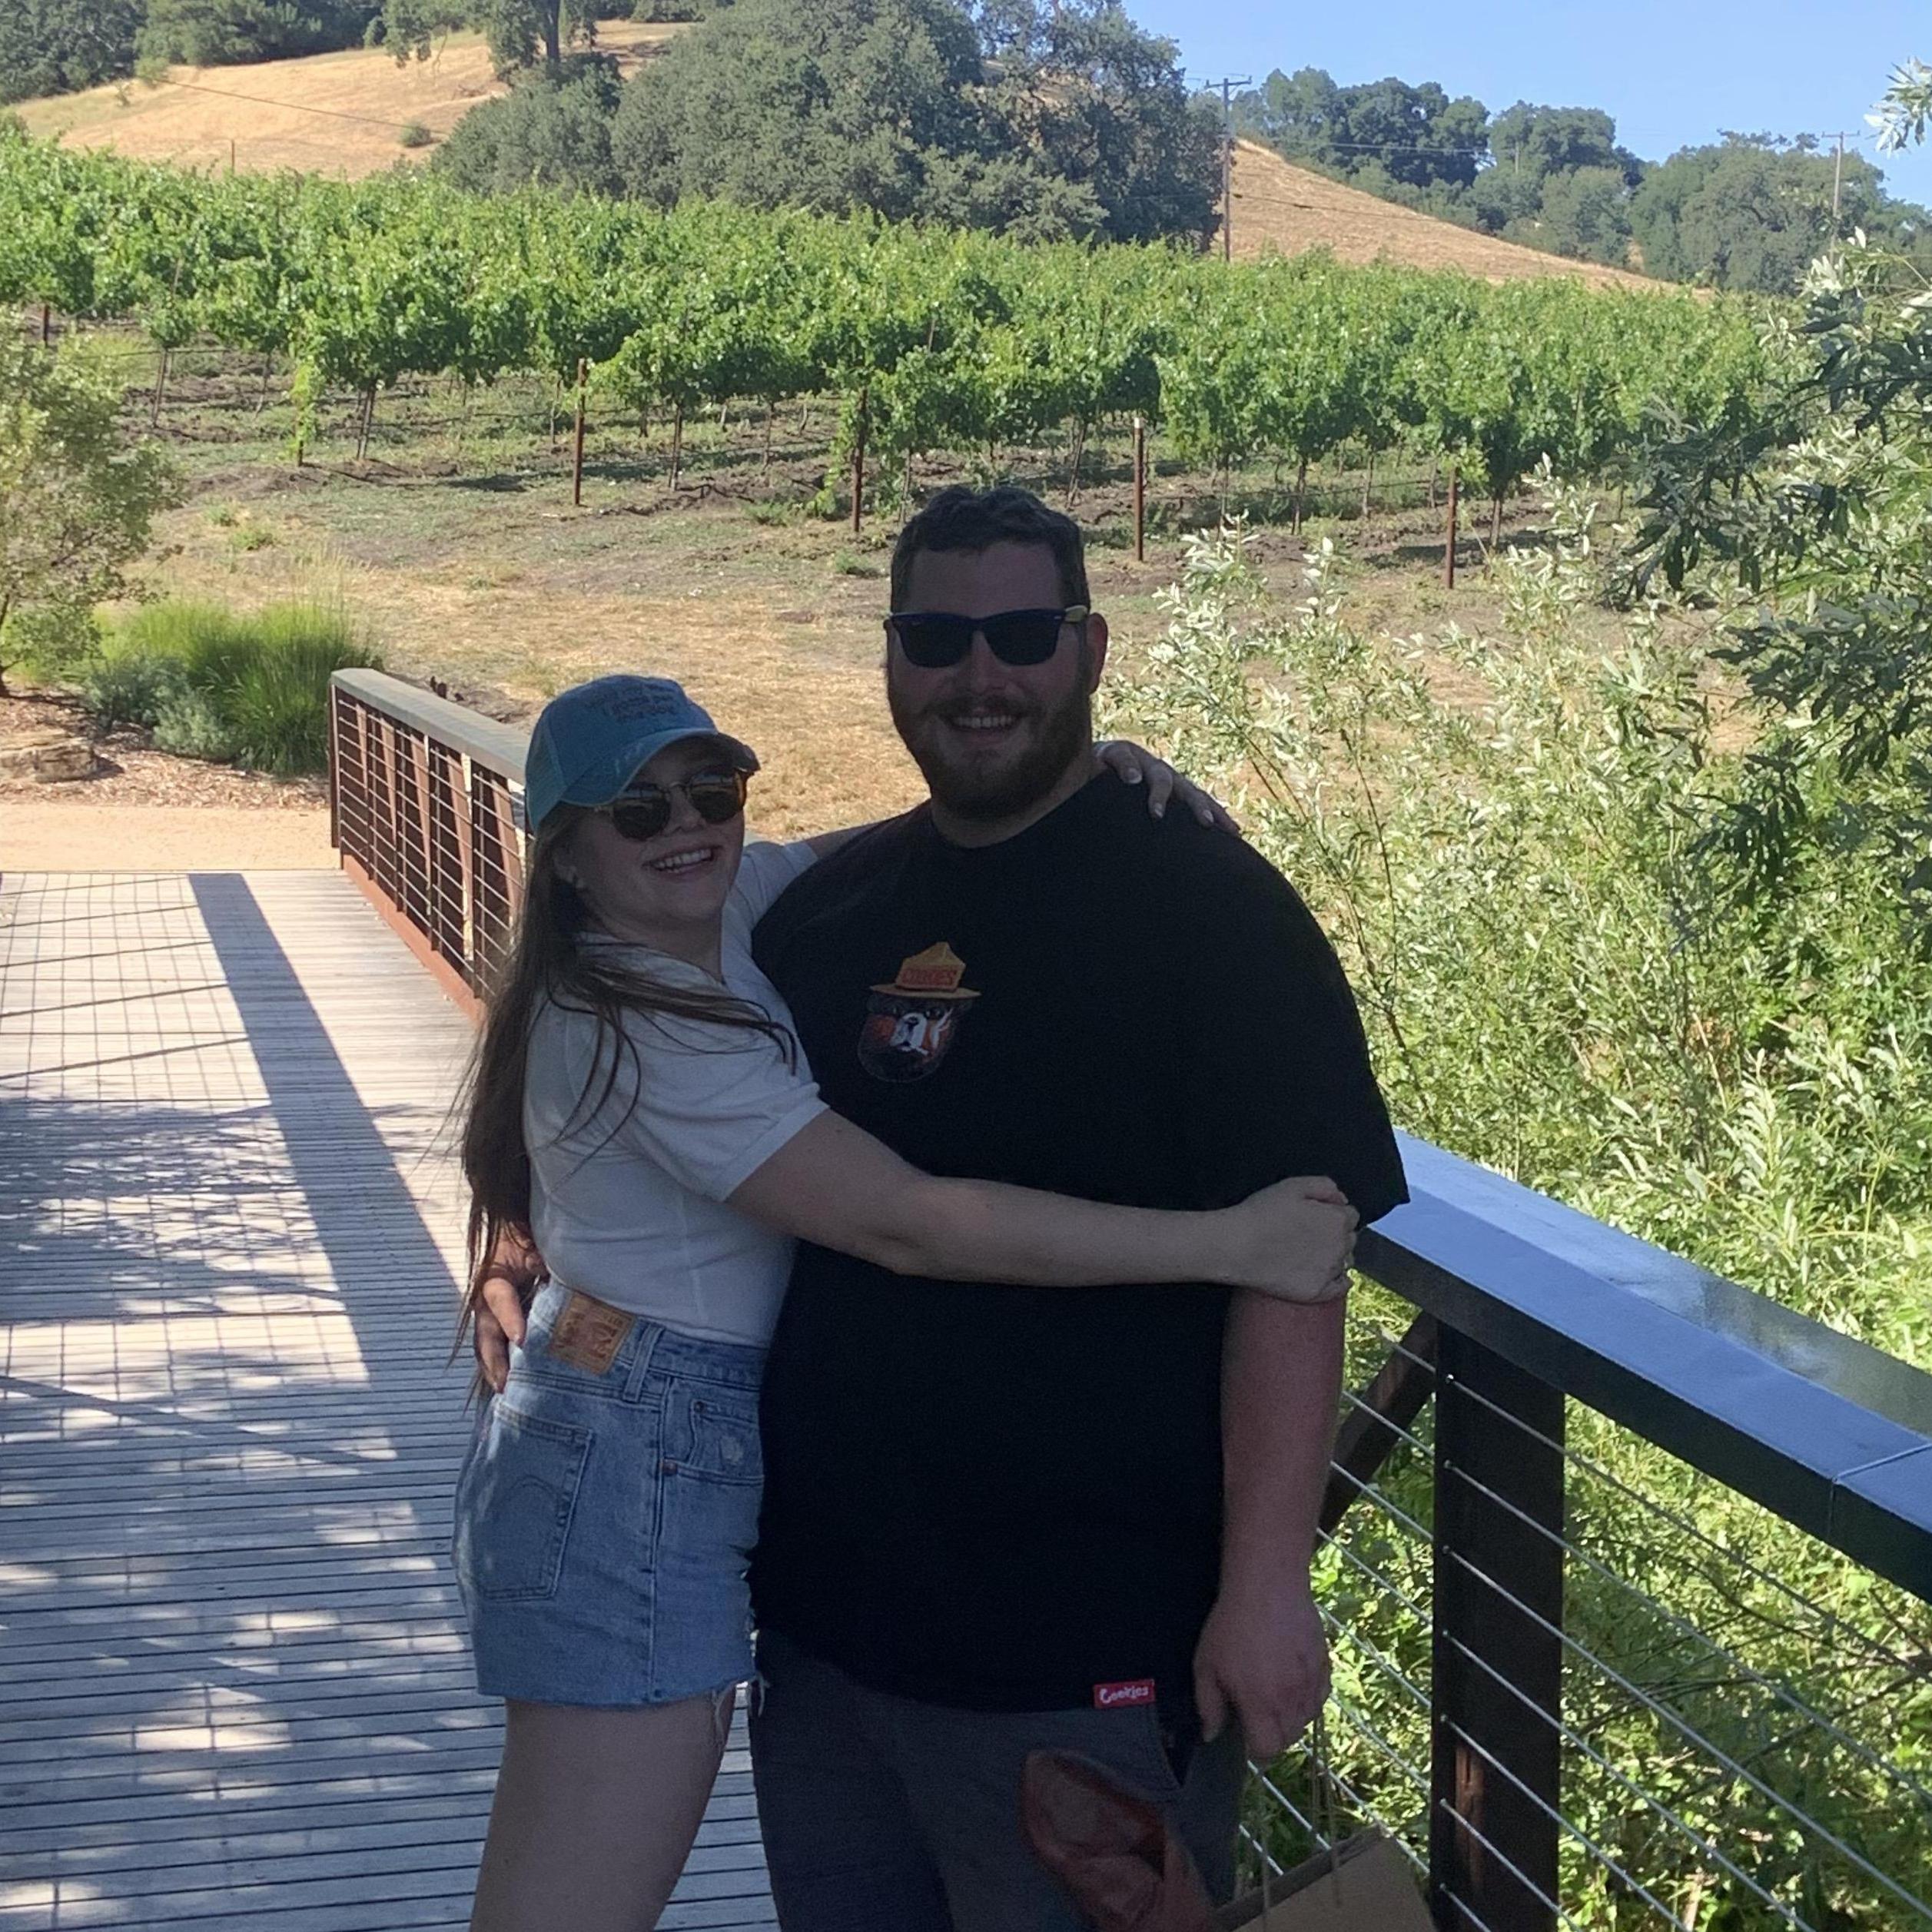 June 20, 2020 - Paso Robles, Riley's parents took us to our first Wine tasting togather